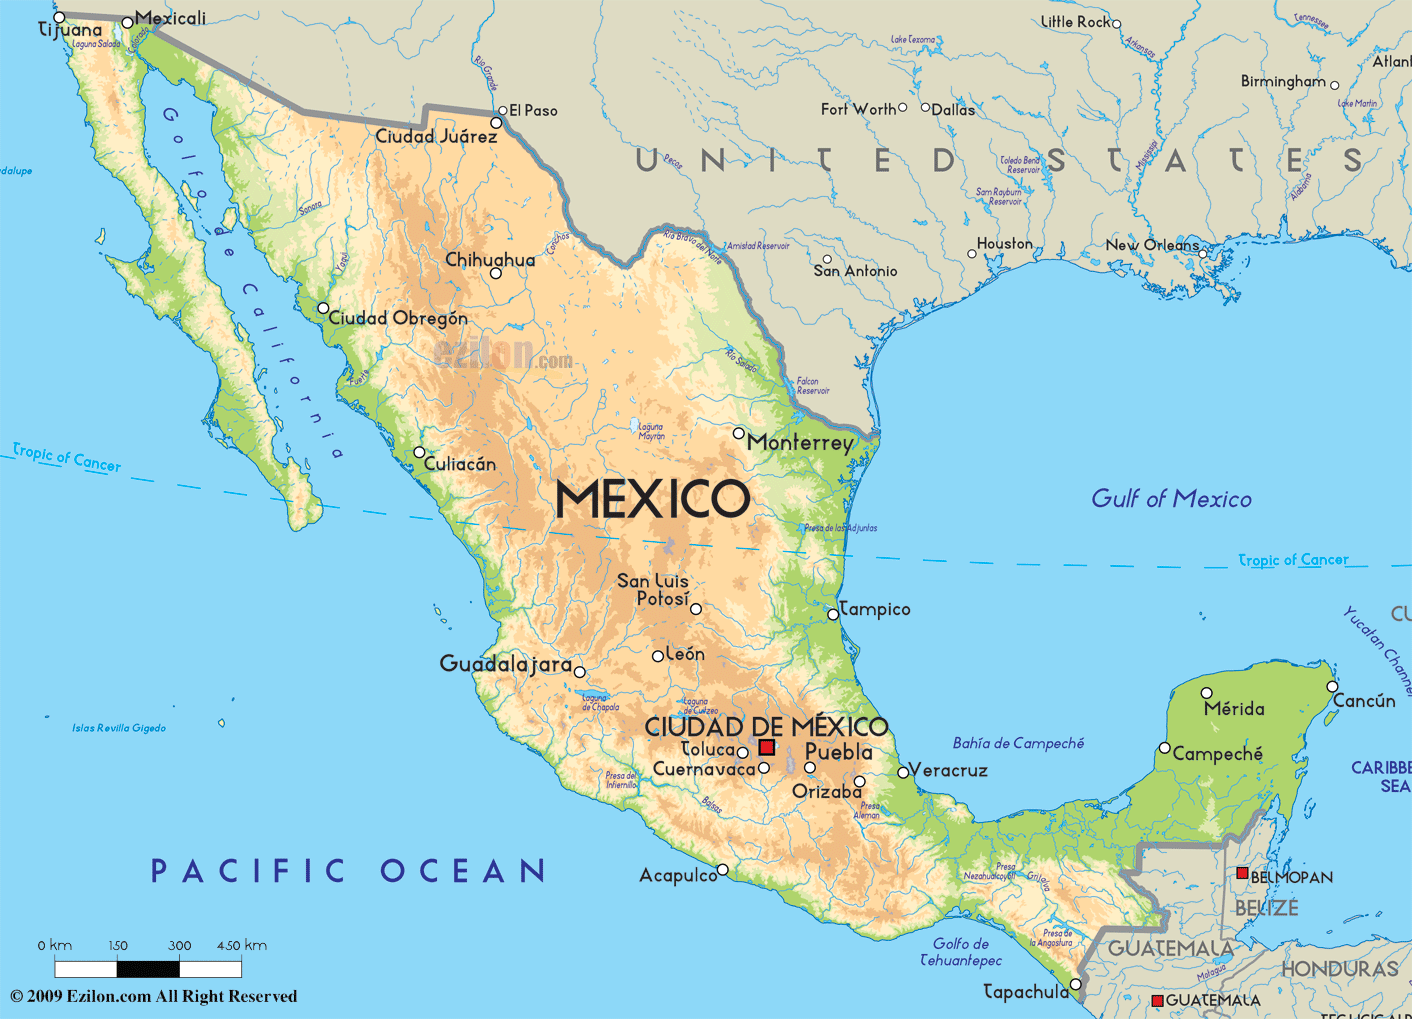 Geography And Gender Fertility Rate In Mexico